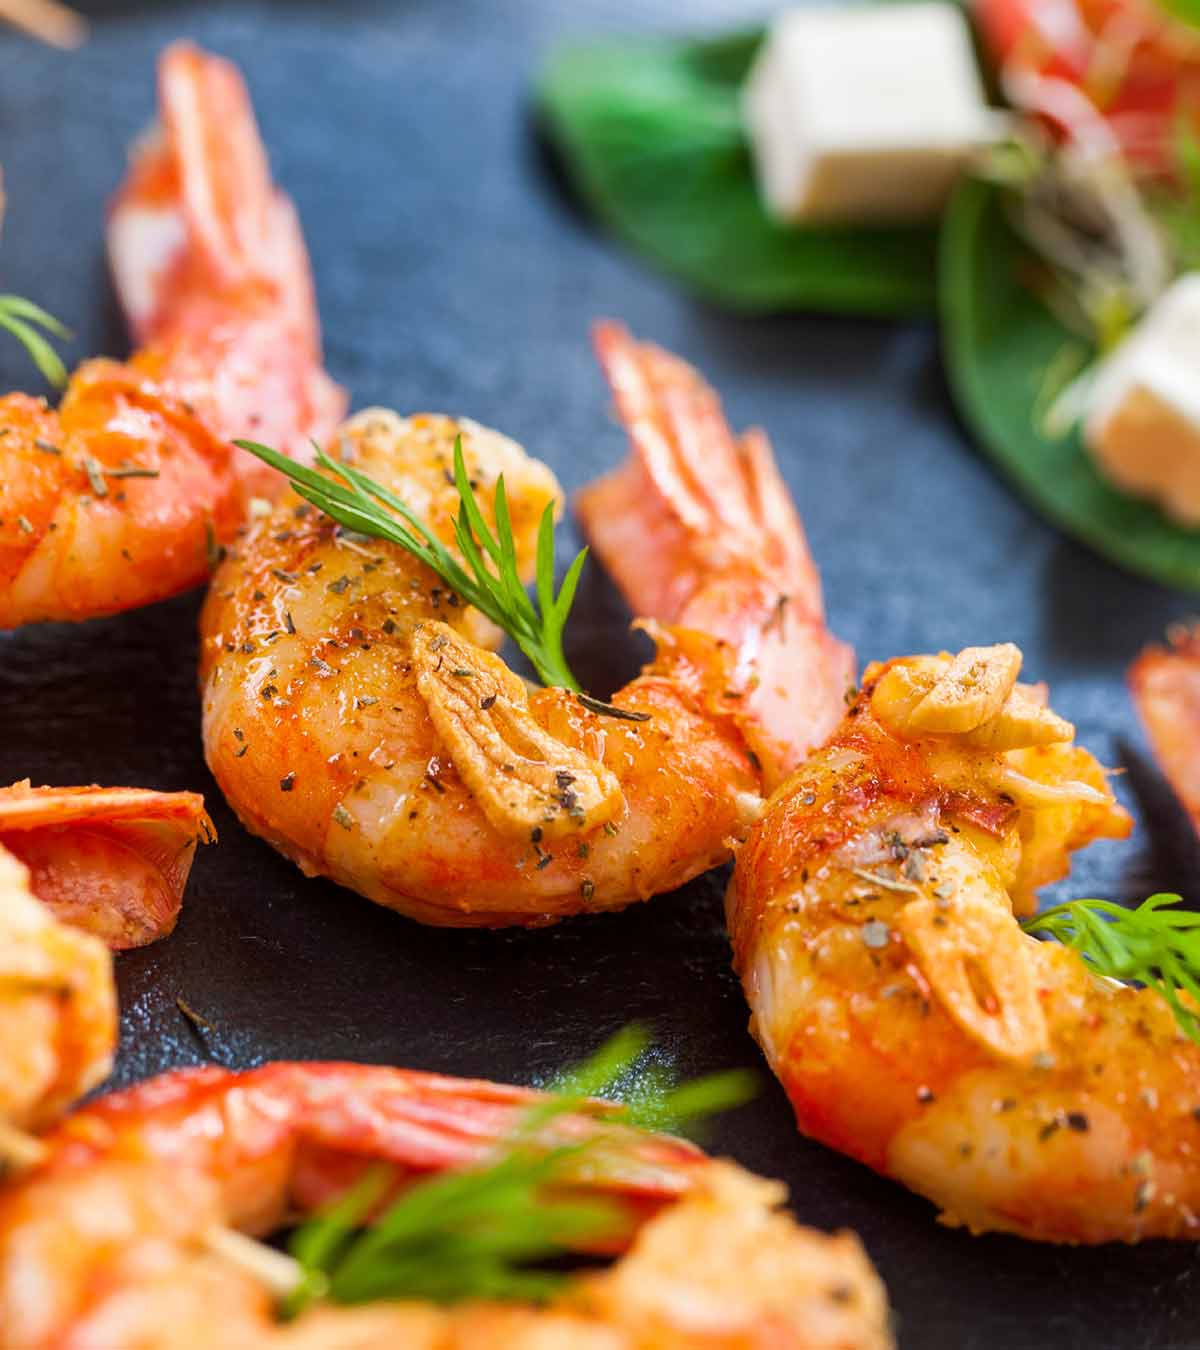 Is It Safe To Eat Shrimp When Breastfeeding?